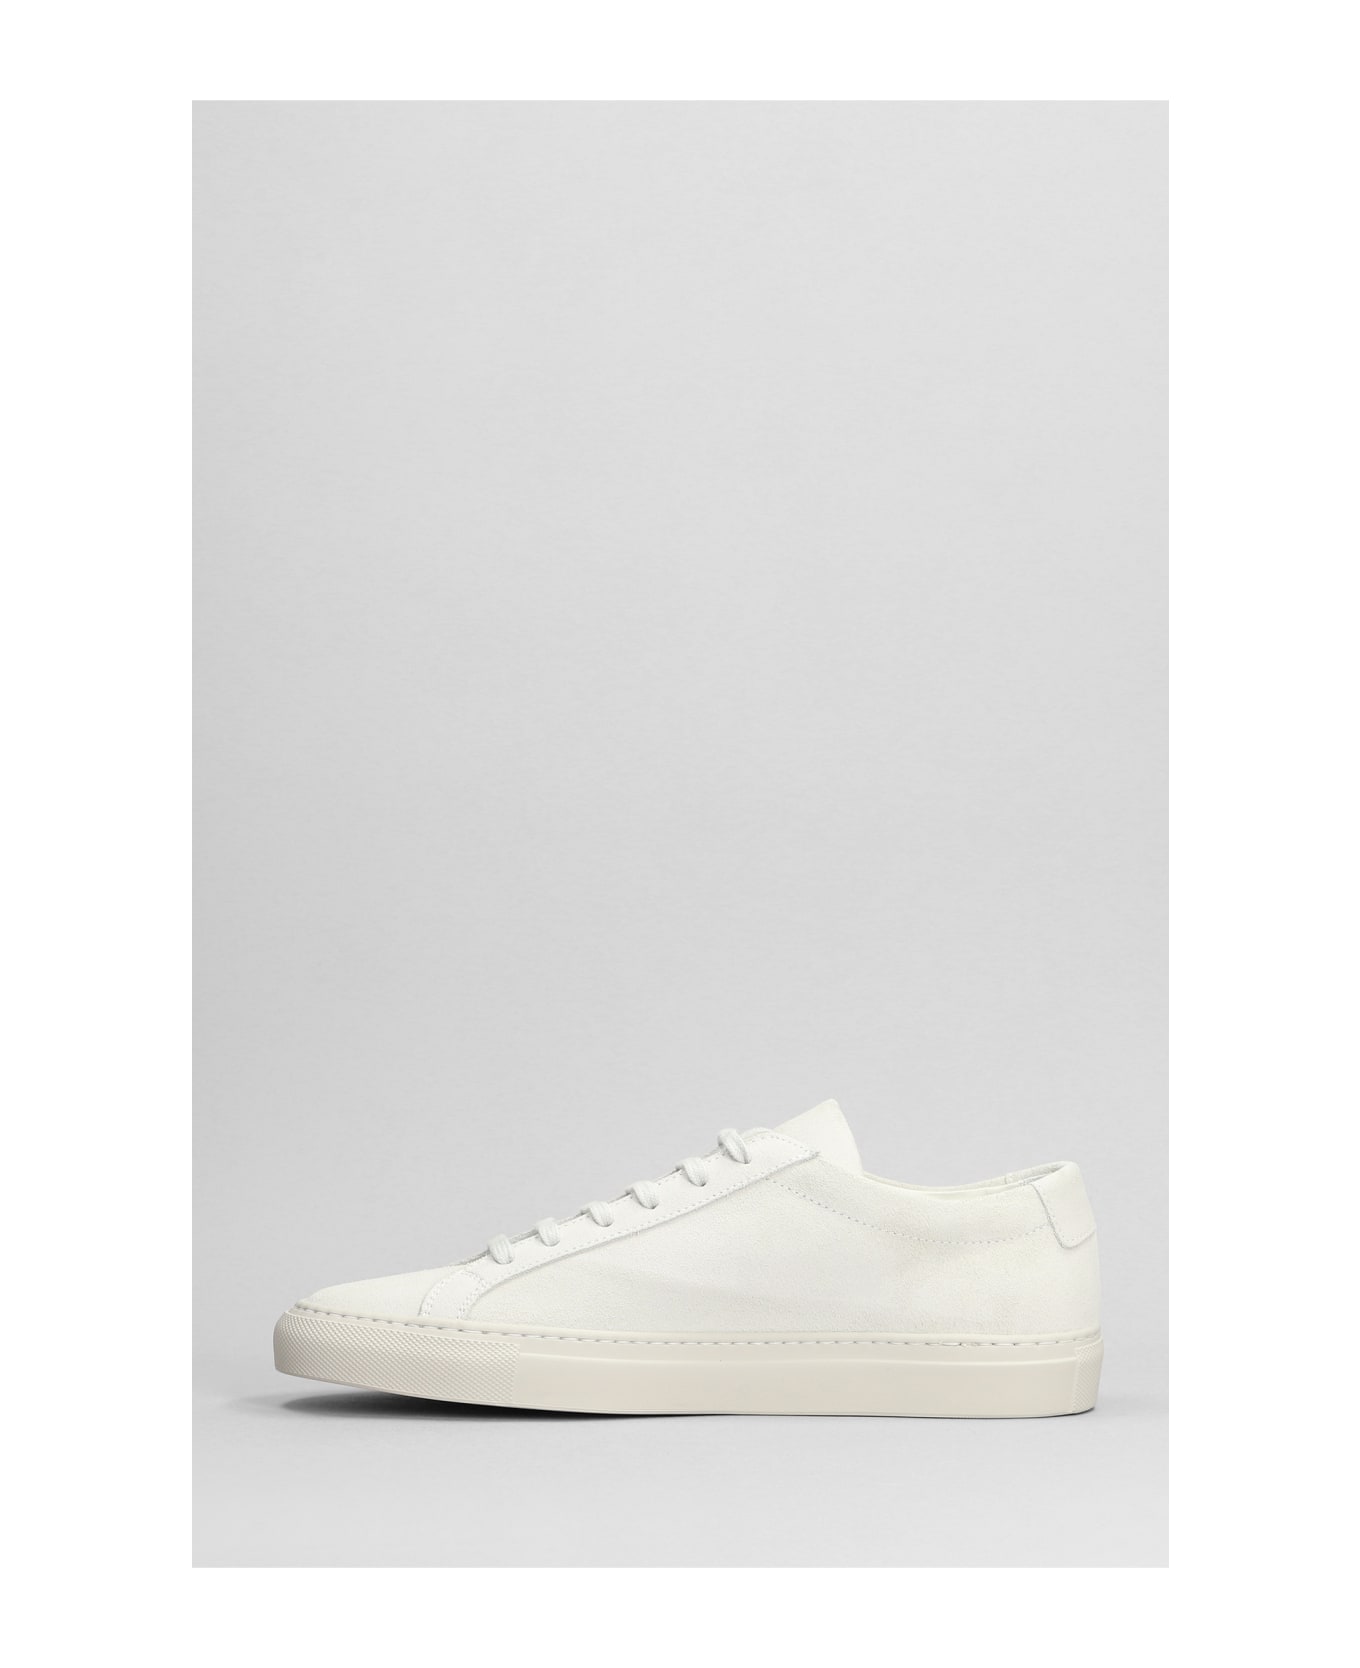 Common Projects Original Achilles Sneakers - grey